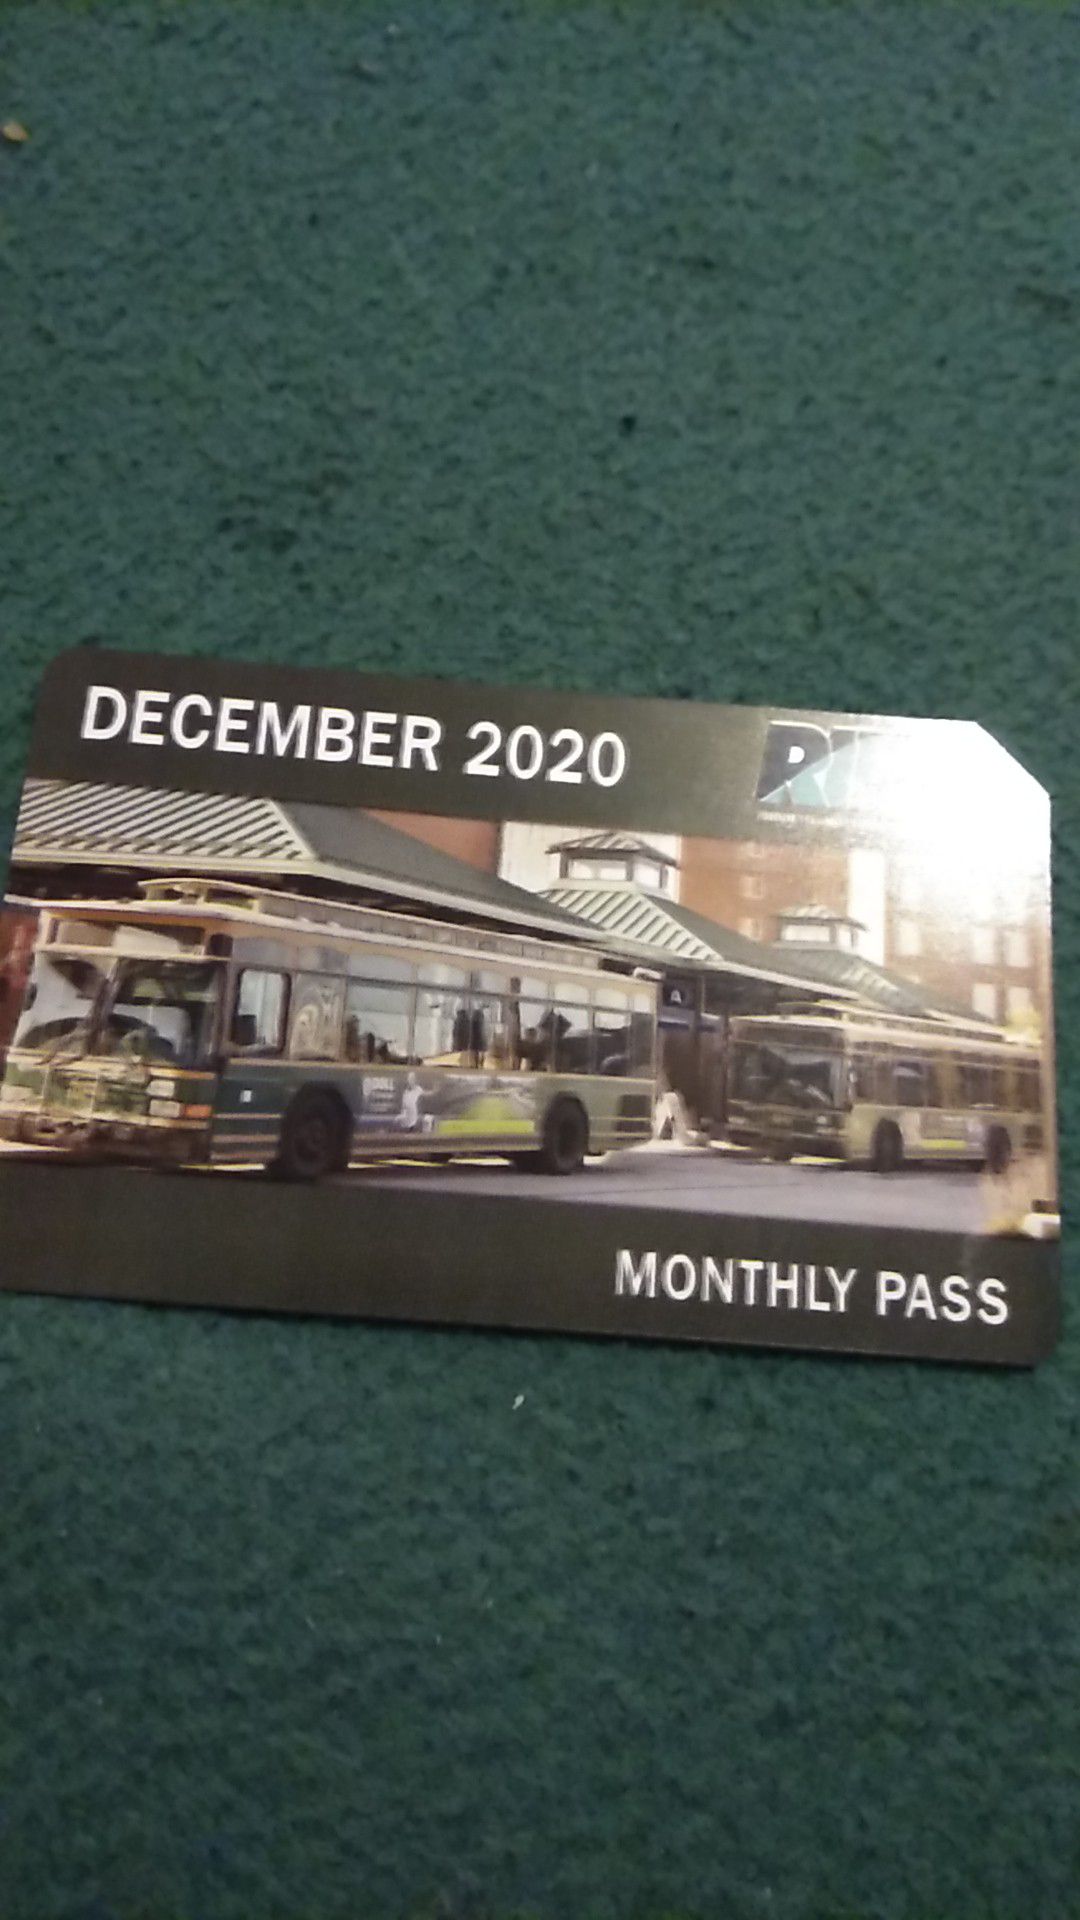 Monthly bas pass